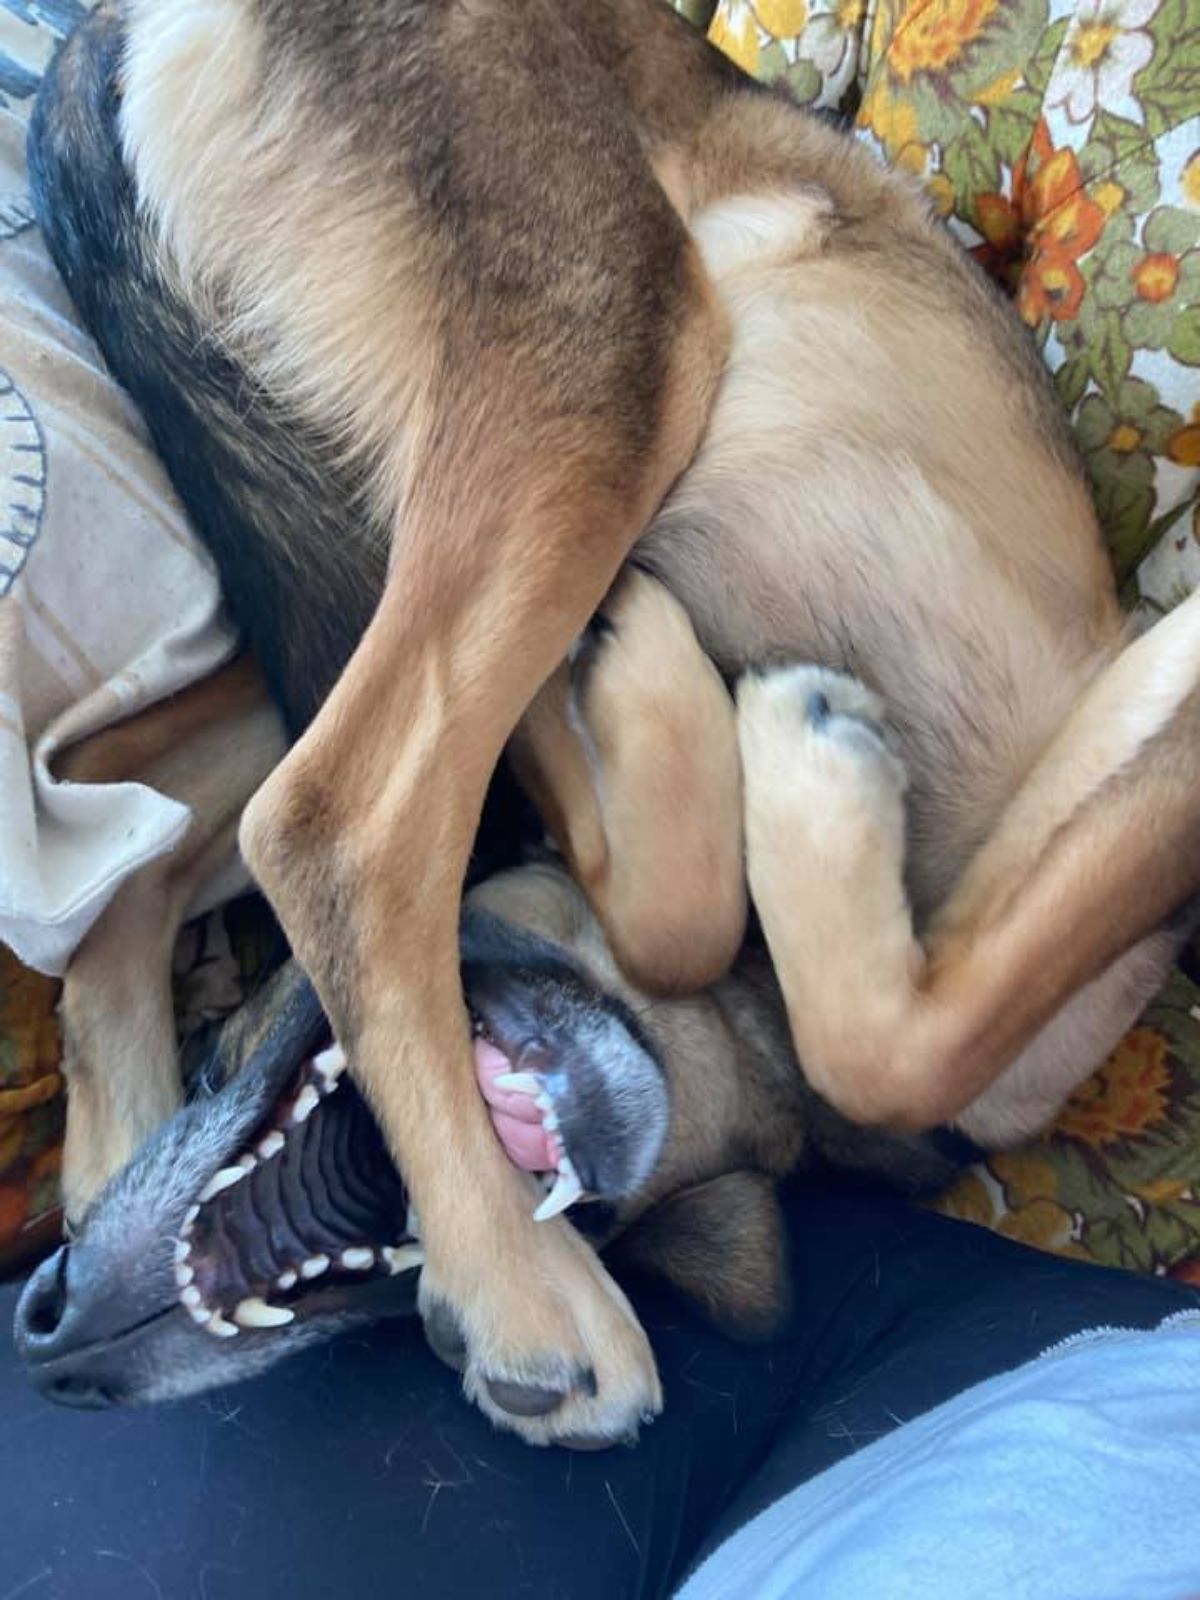 german shepherd sleeping belly up with one back leg inside its open mouth